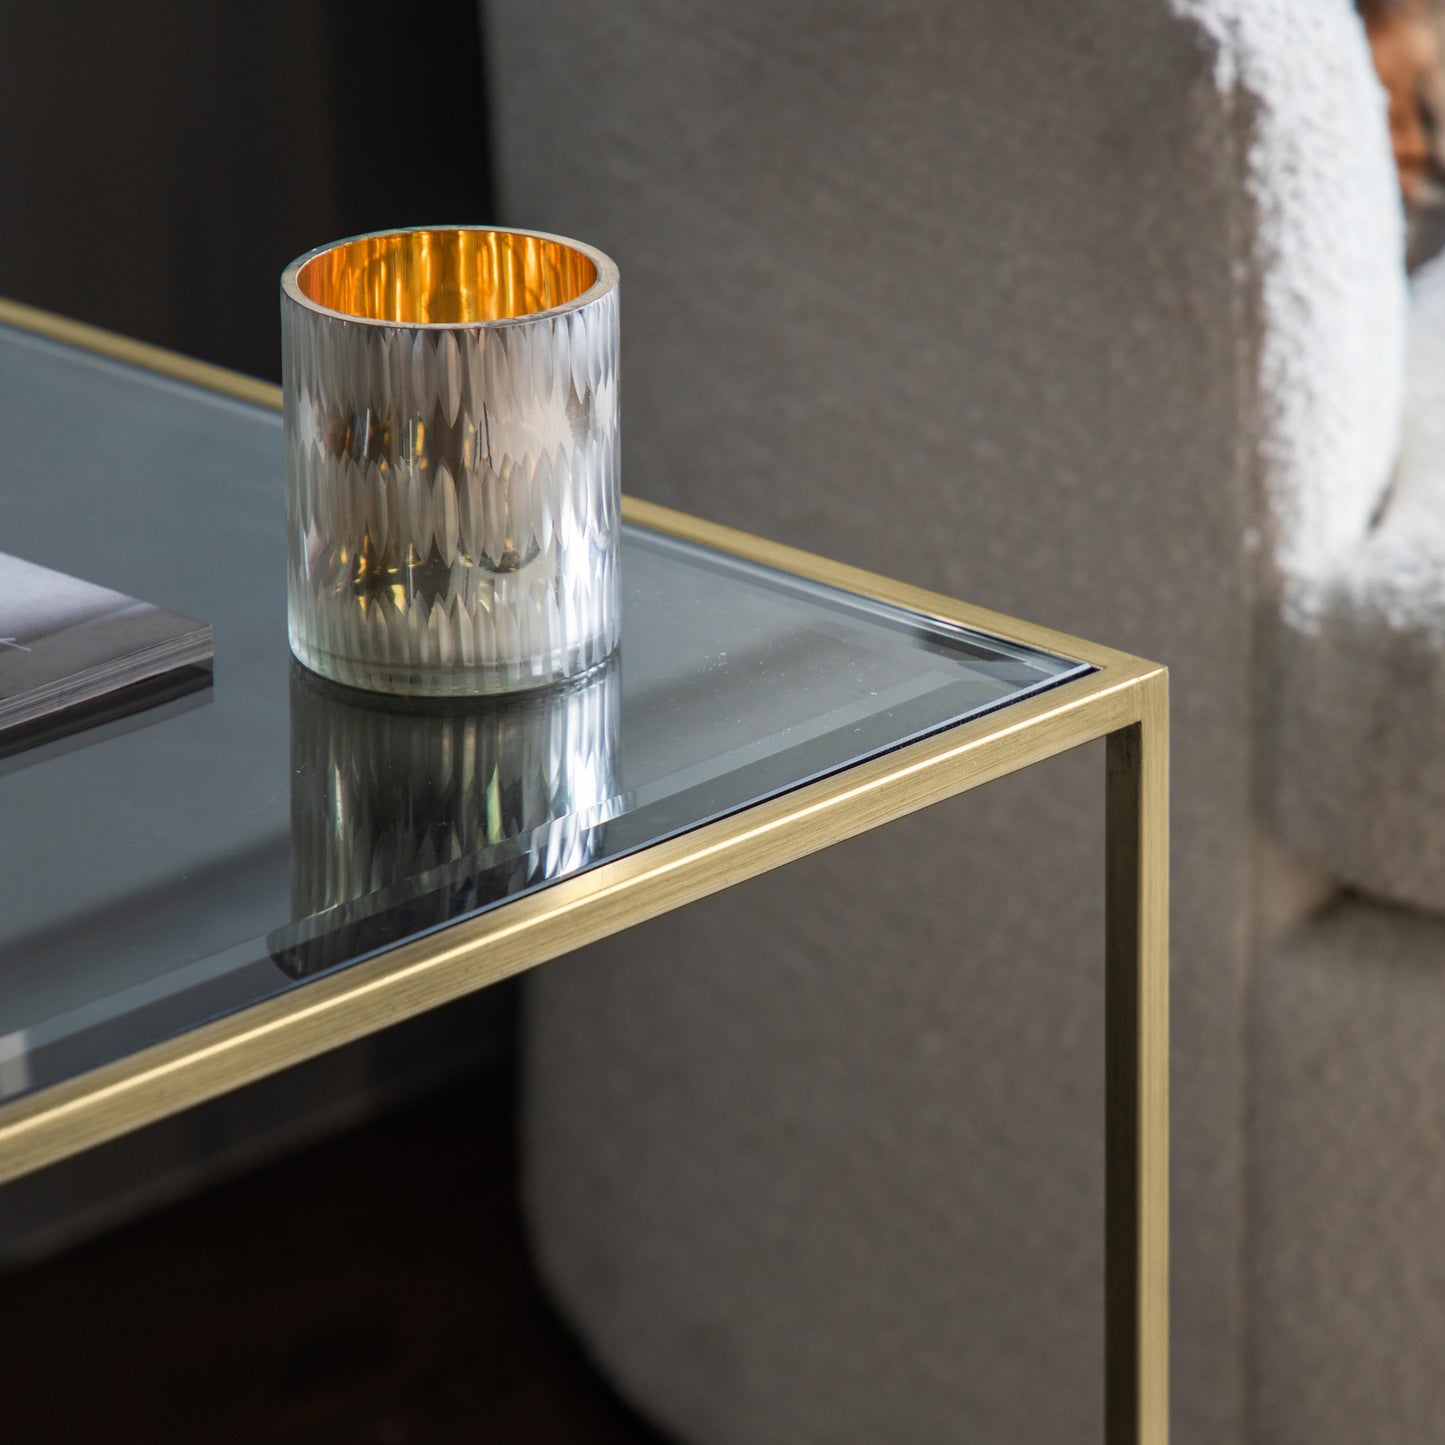 An interior decor side table from Kikiathome.co.uk featuring a champagne finish and dimensions of 500x500x550mm, adorned with a candle.